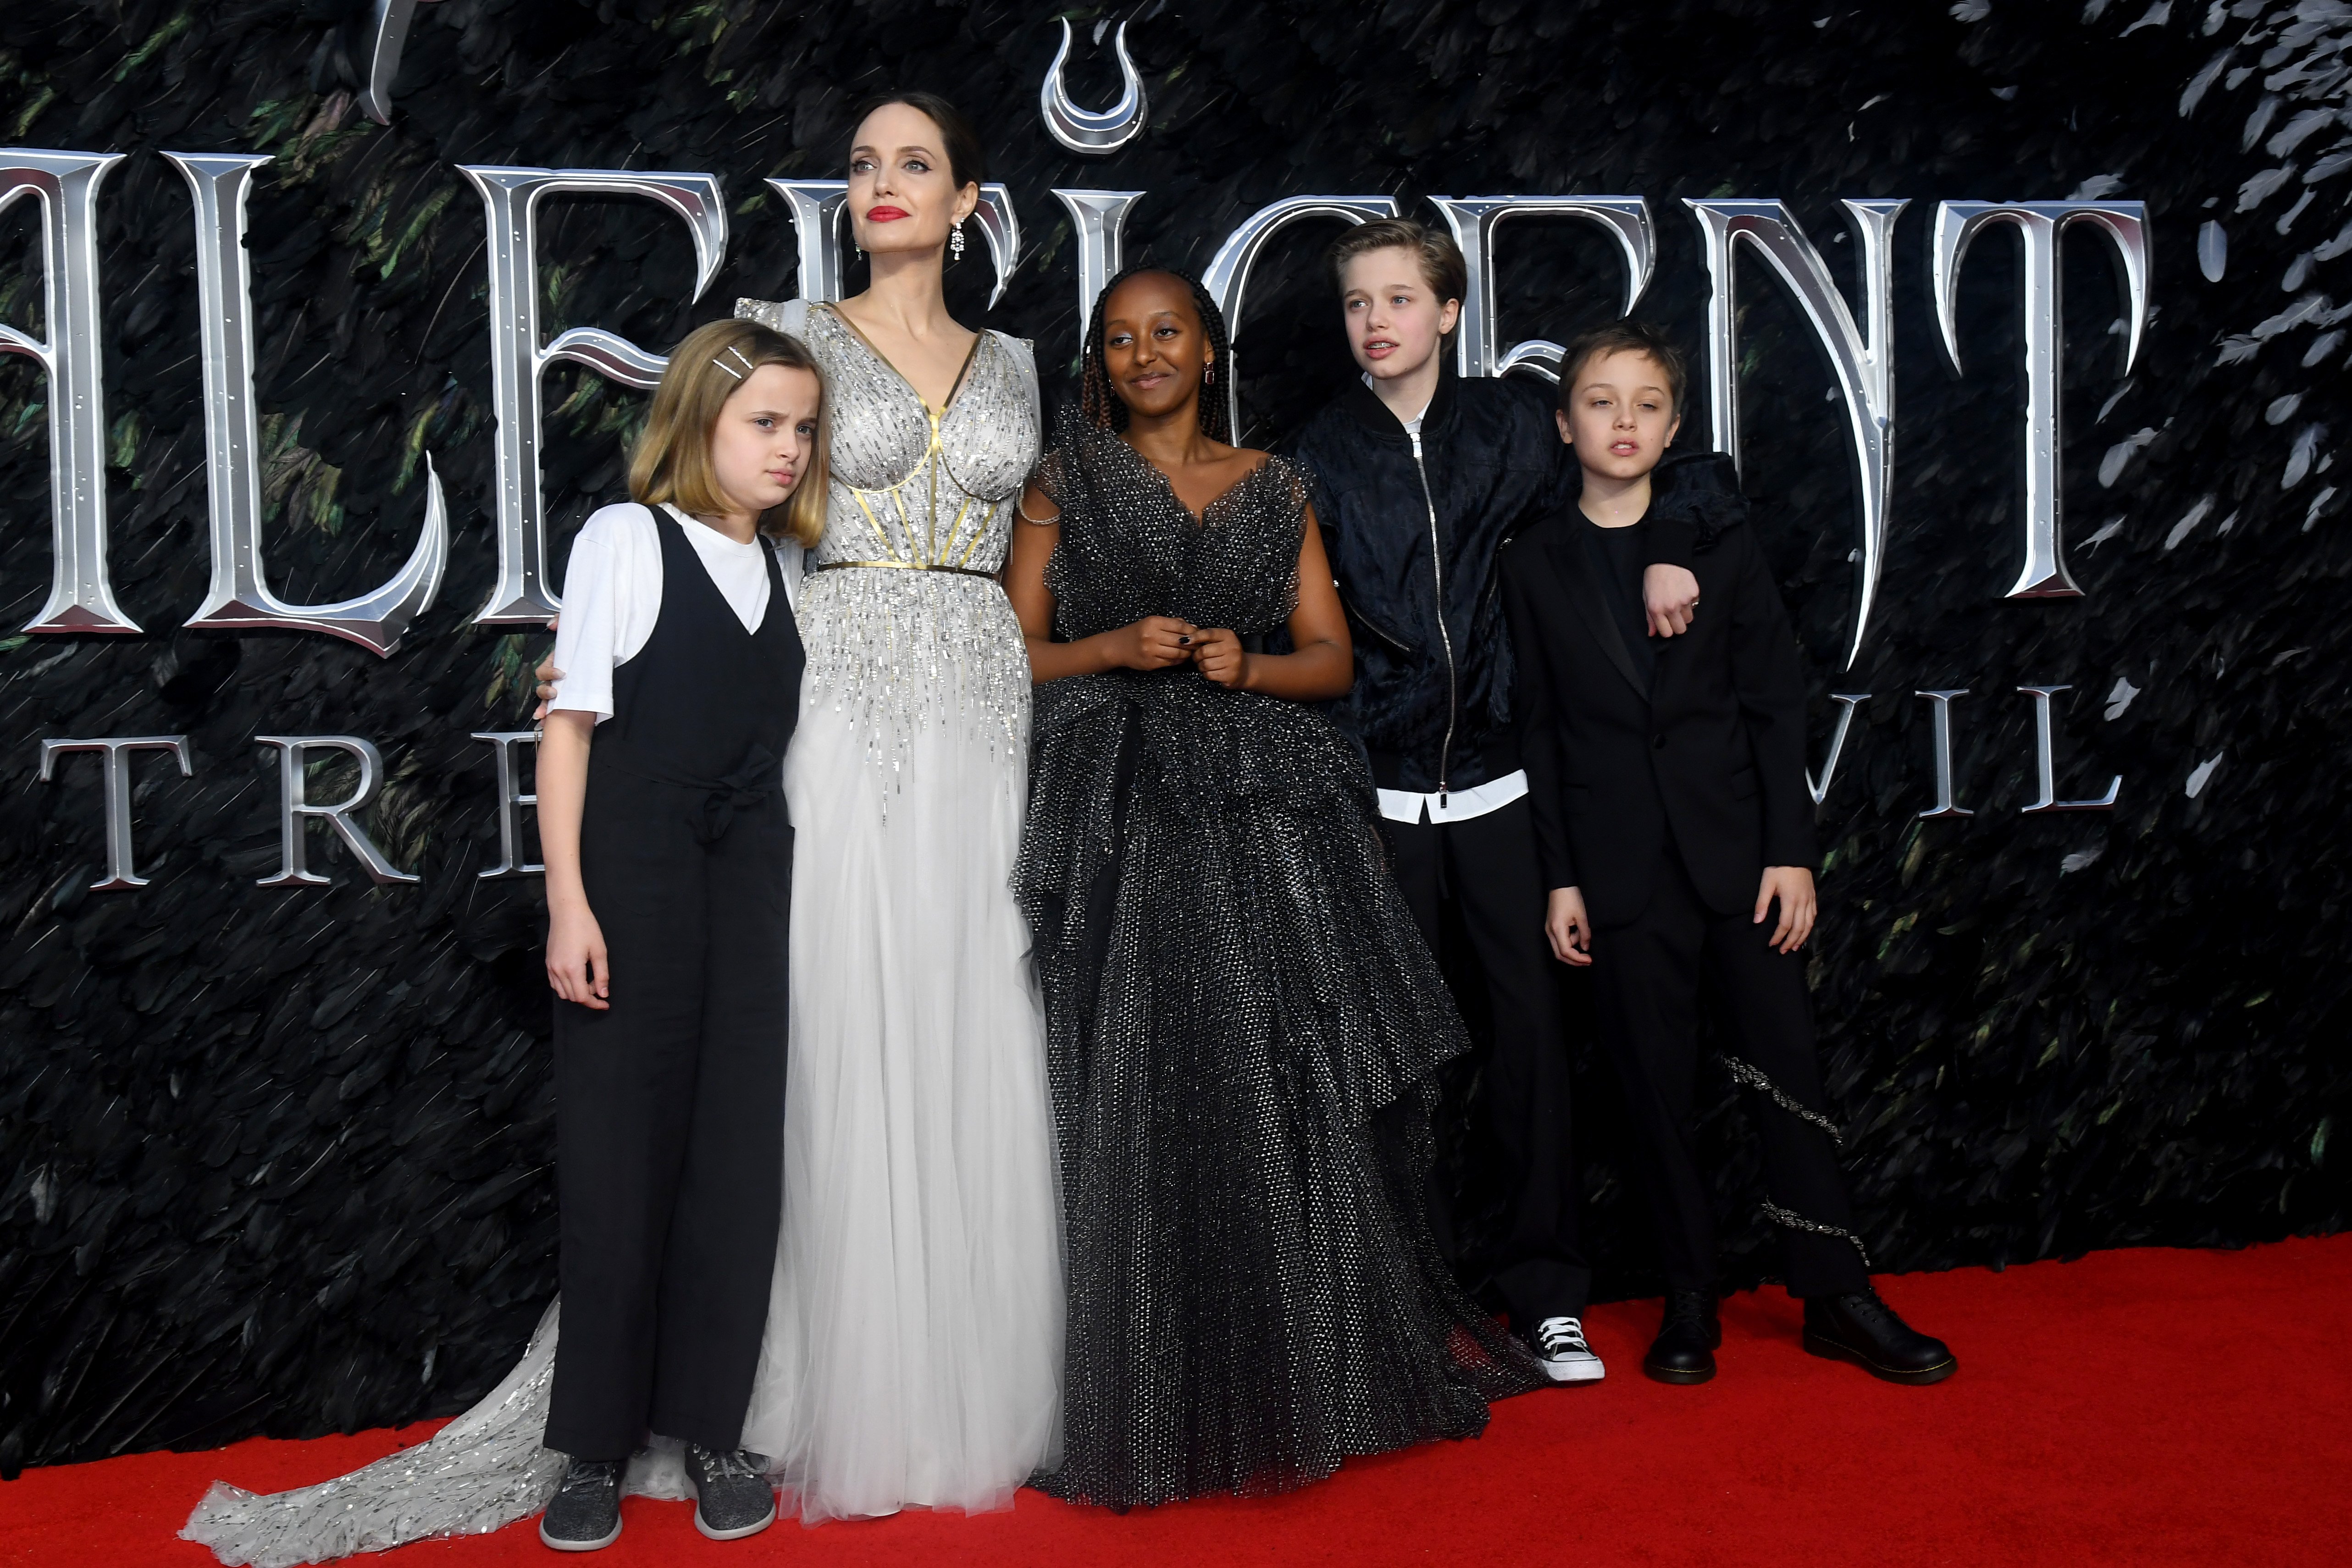 Angelina Jolie with children Vivienne Marcheline Jolie-Pitt, Zahara Marley Jolie-Pitt, Shiloh Nouvel Jolie-Pitt and Knox Leon Jolie-Pitt at the European premiere of "Maleficent: Mistress of Evil" at Odeon IMAX Waterloo on October 09, 2019 in London, England. | Source: Getty Images